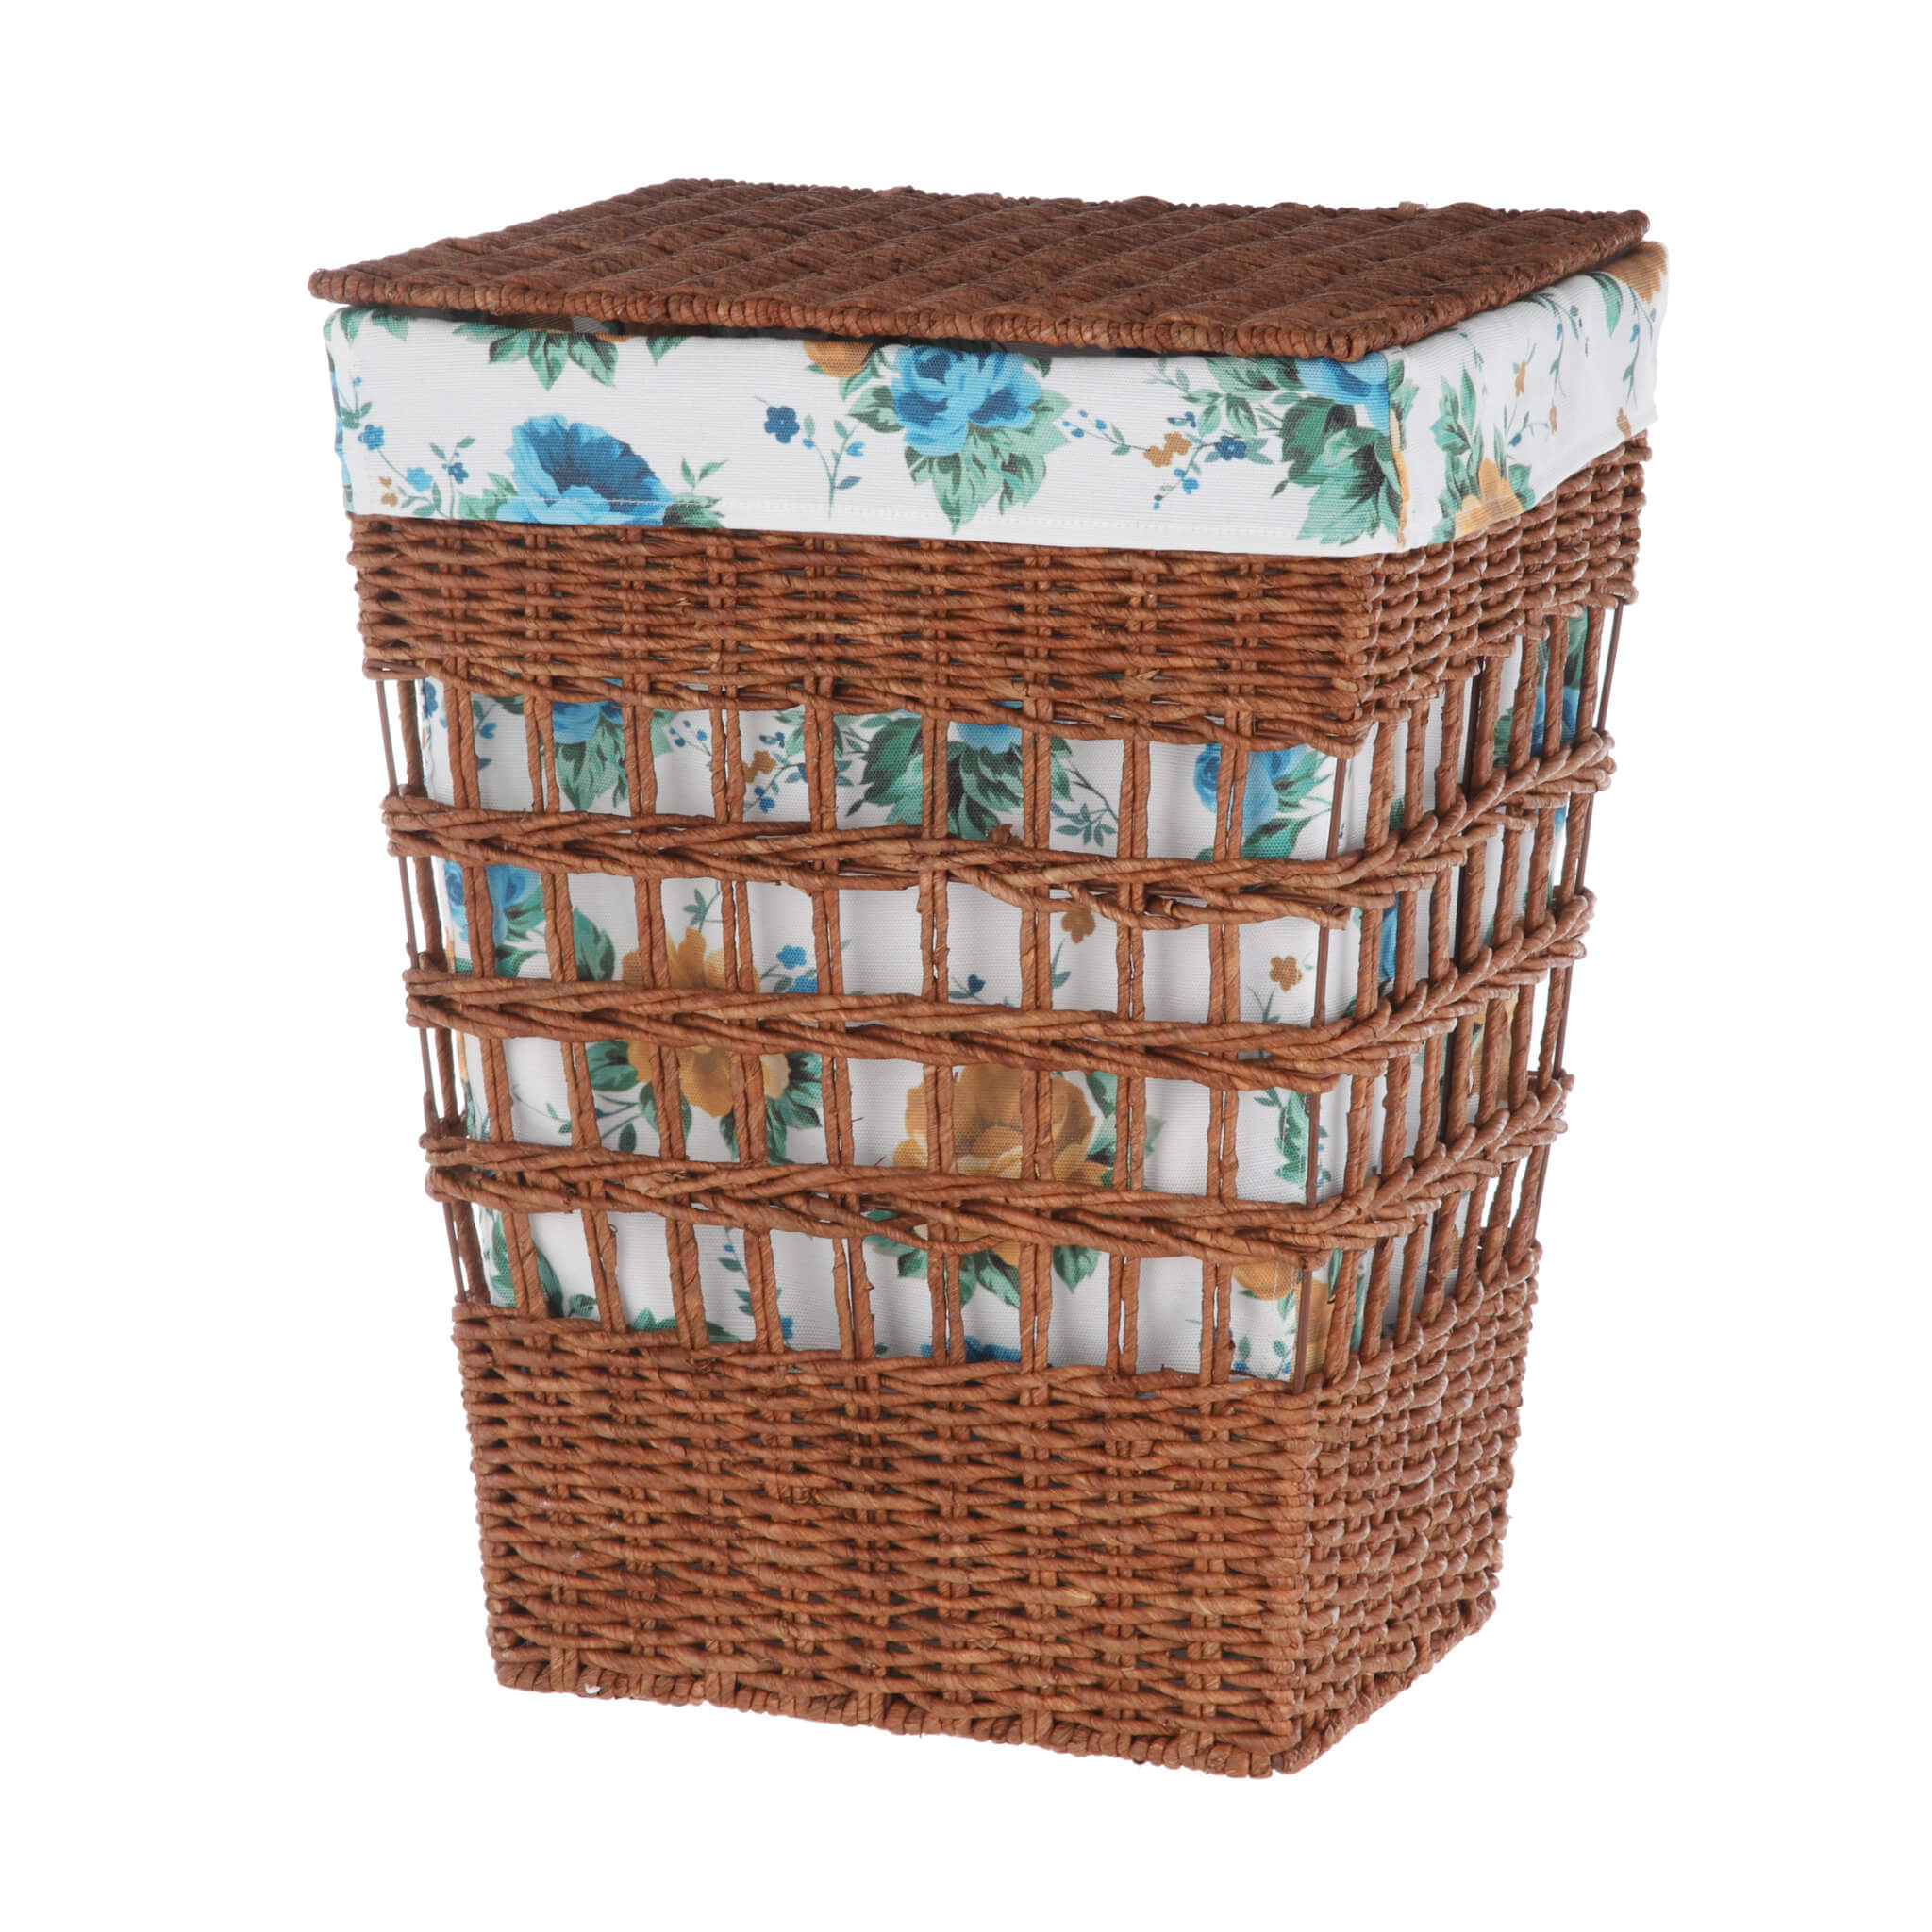 The Pioneer Woman Rose Shadow Maize Laundry Hamper ONLY $21.86 (Reg $35)